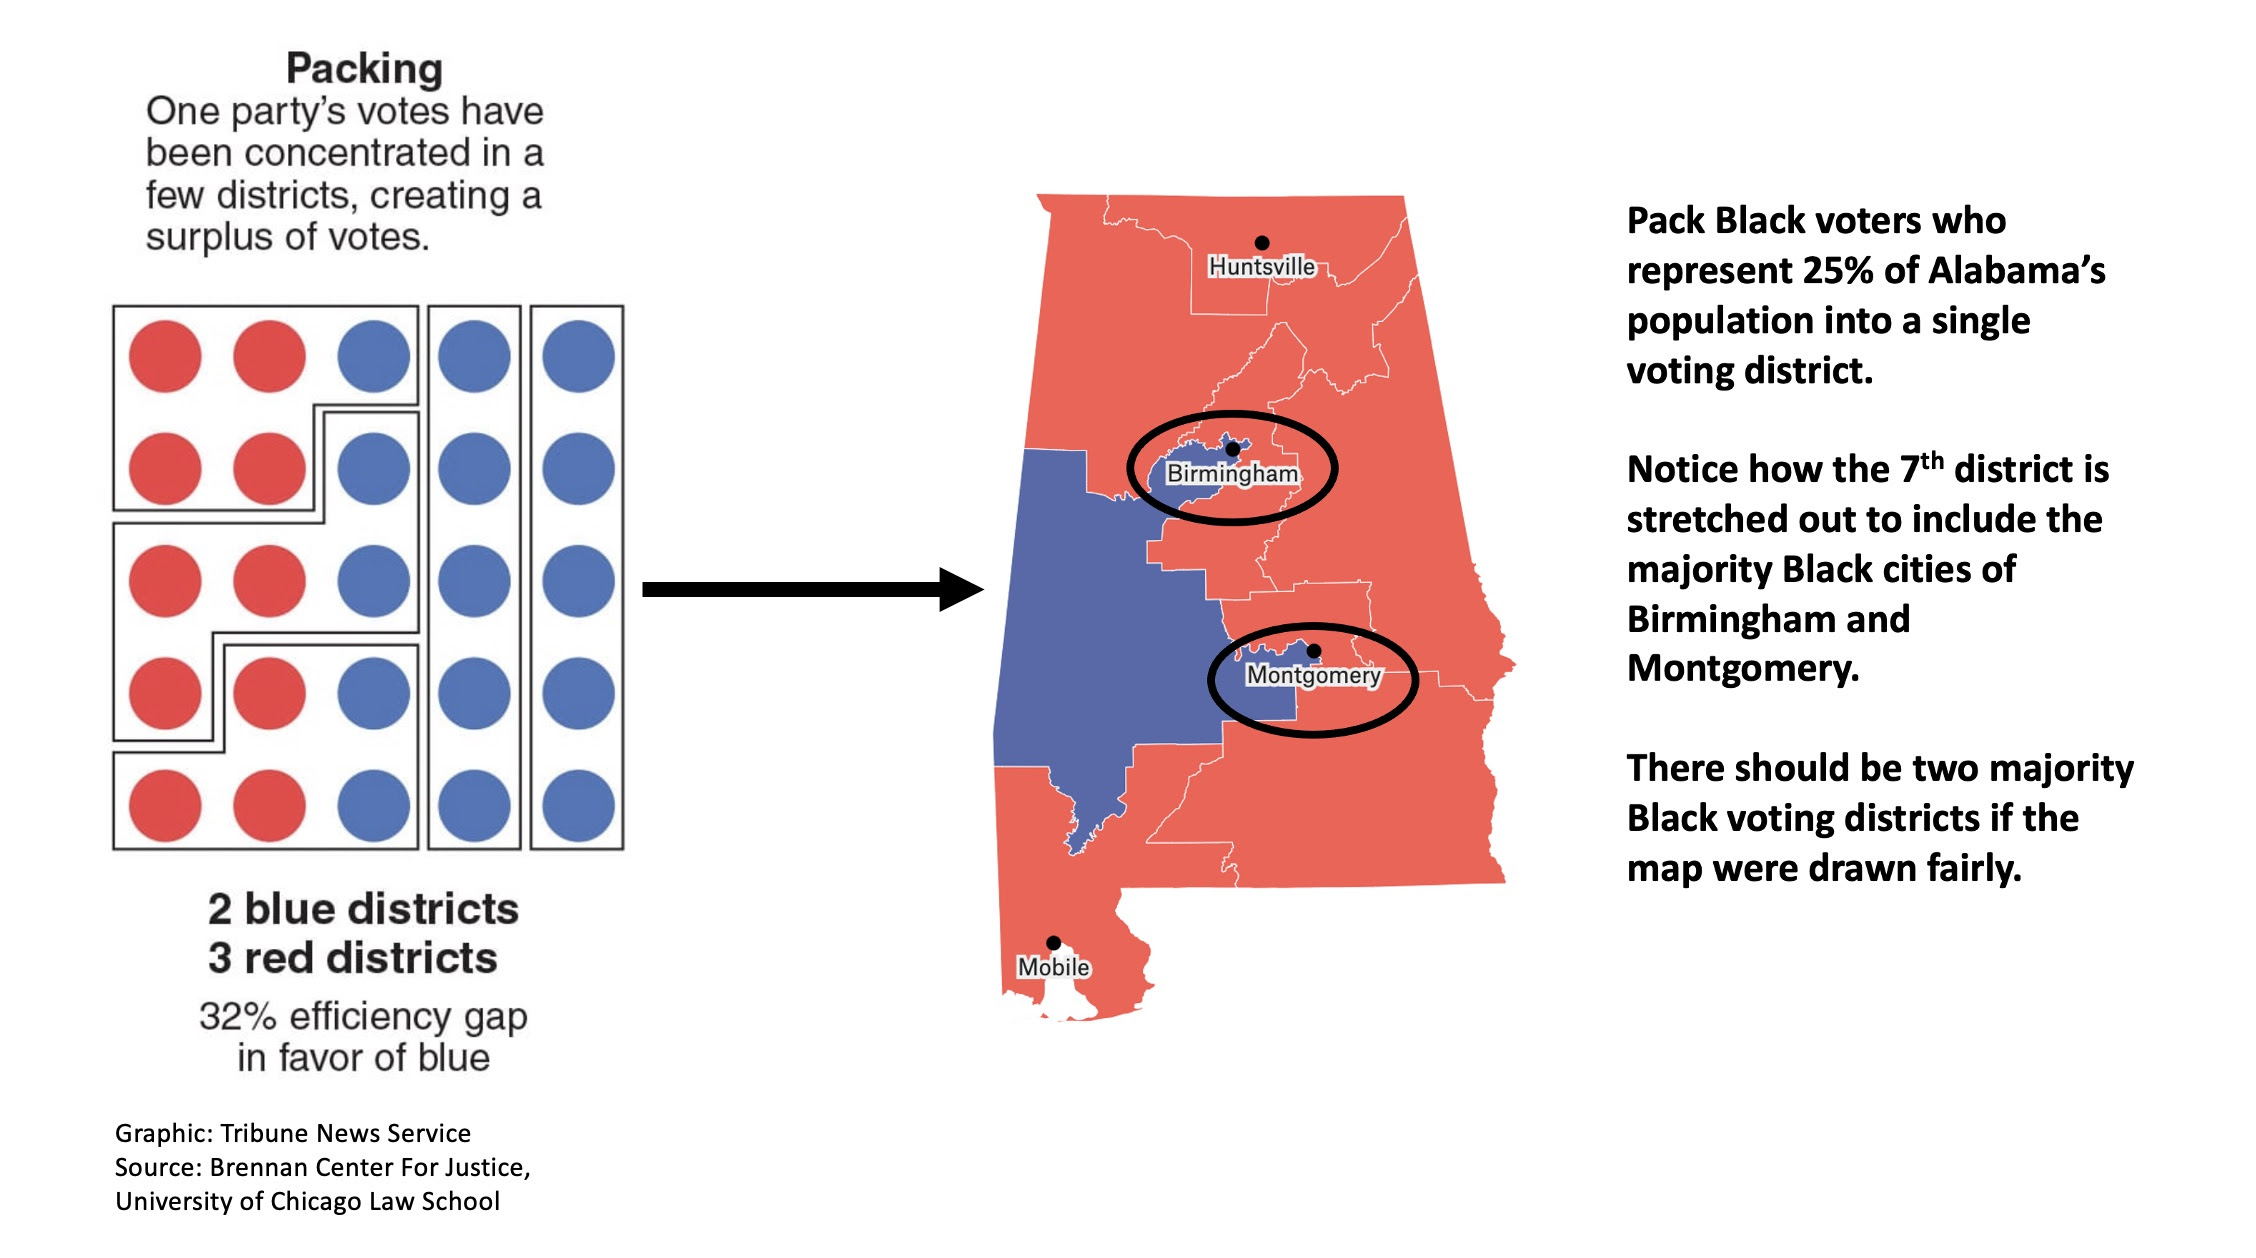 Racial Republican gerrymandering in Alabama approved by Supreme Court